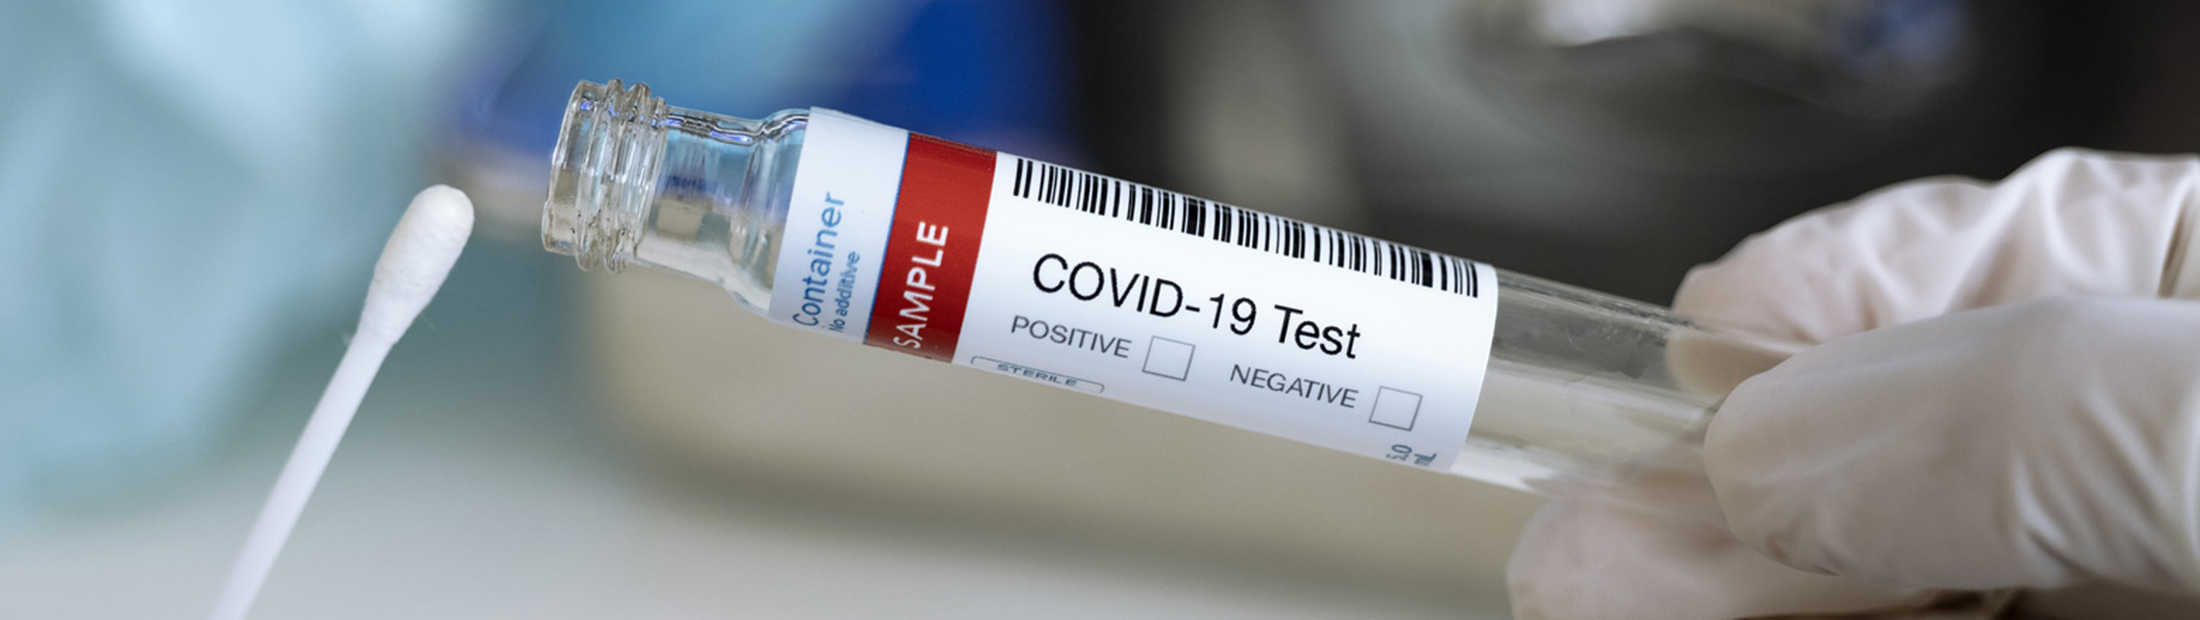 A person in gloves holds up a q-tip to a vial labeled "COVID-19 Test"